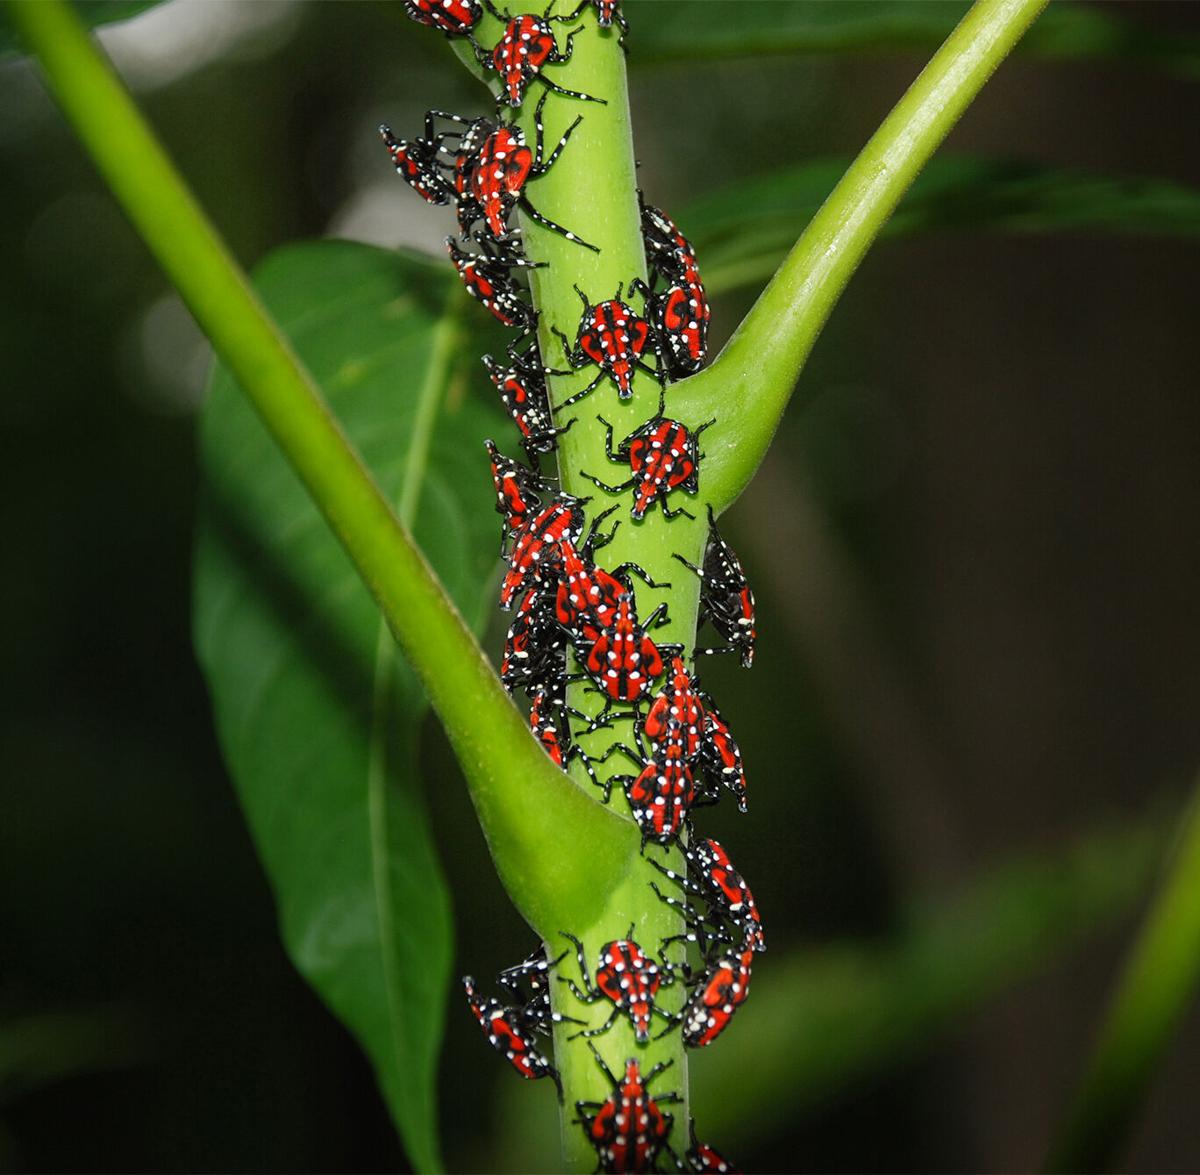 Adult and nymph spotted lanternflies